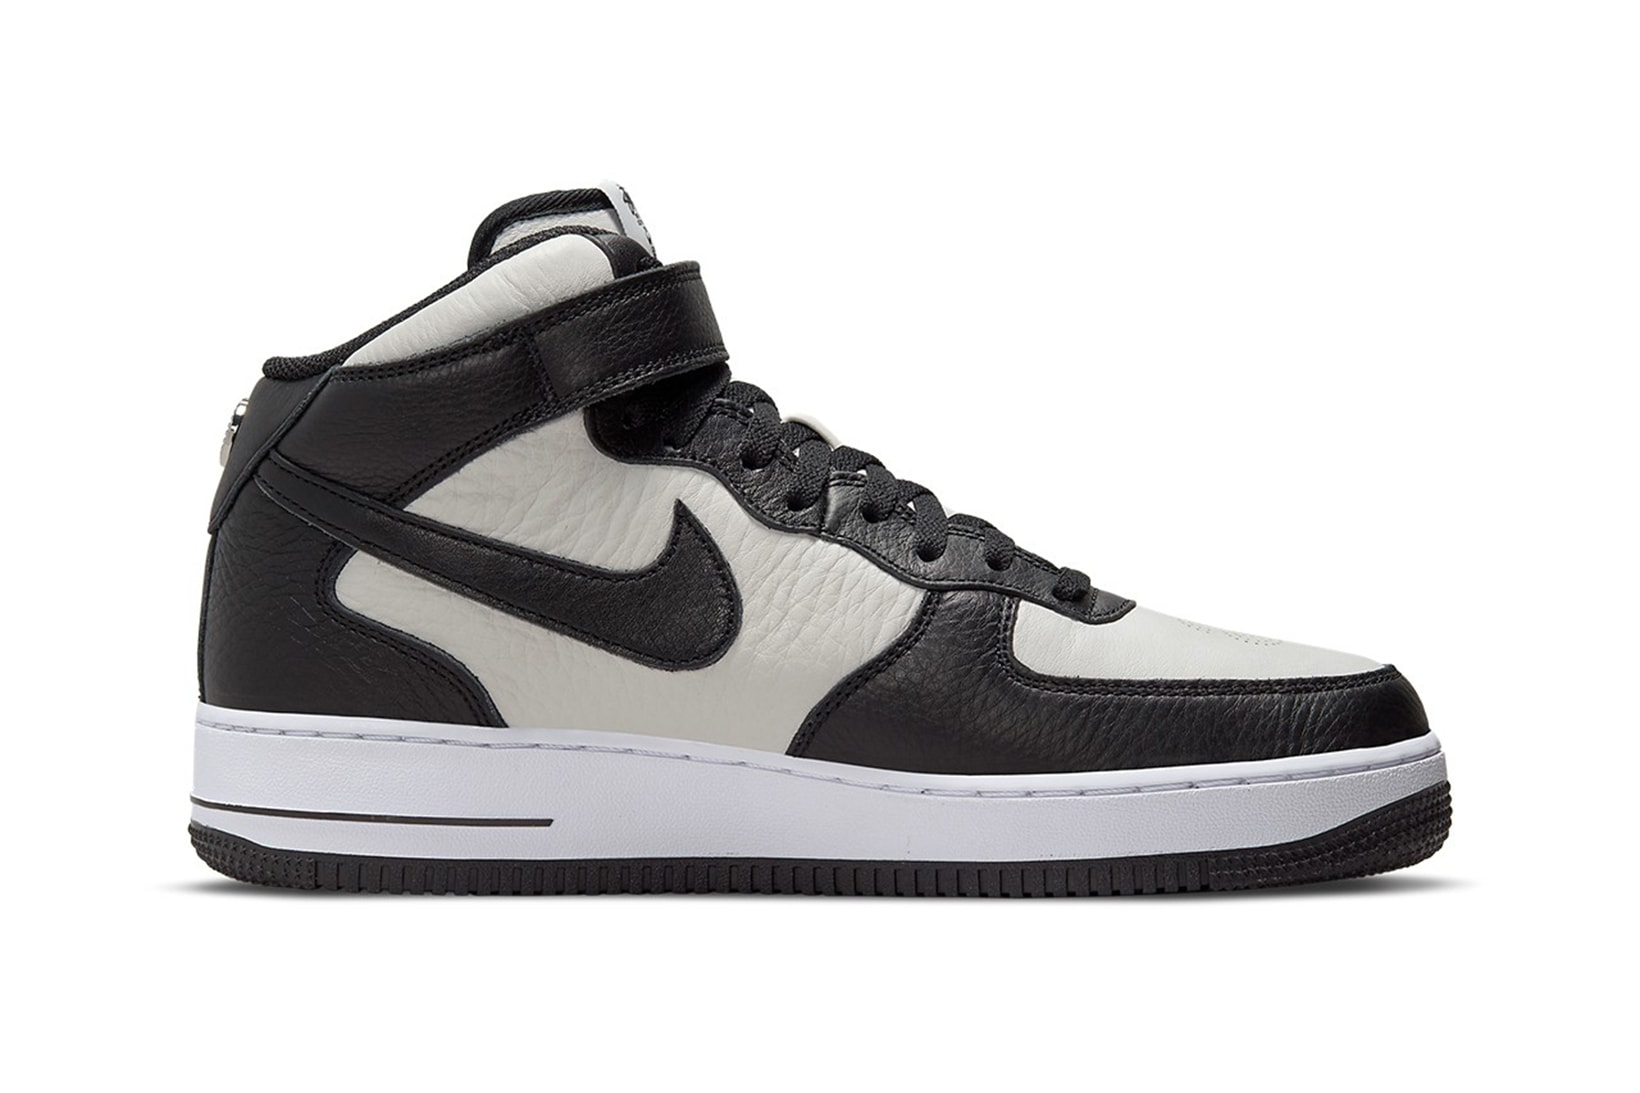 Stüssy Nike Air Force 1 Mid Sneakers Black White Side View 2